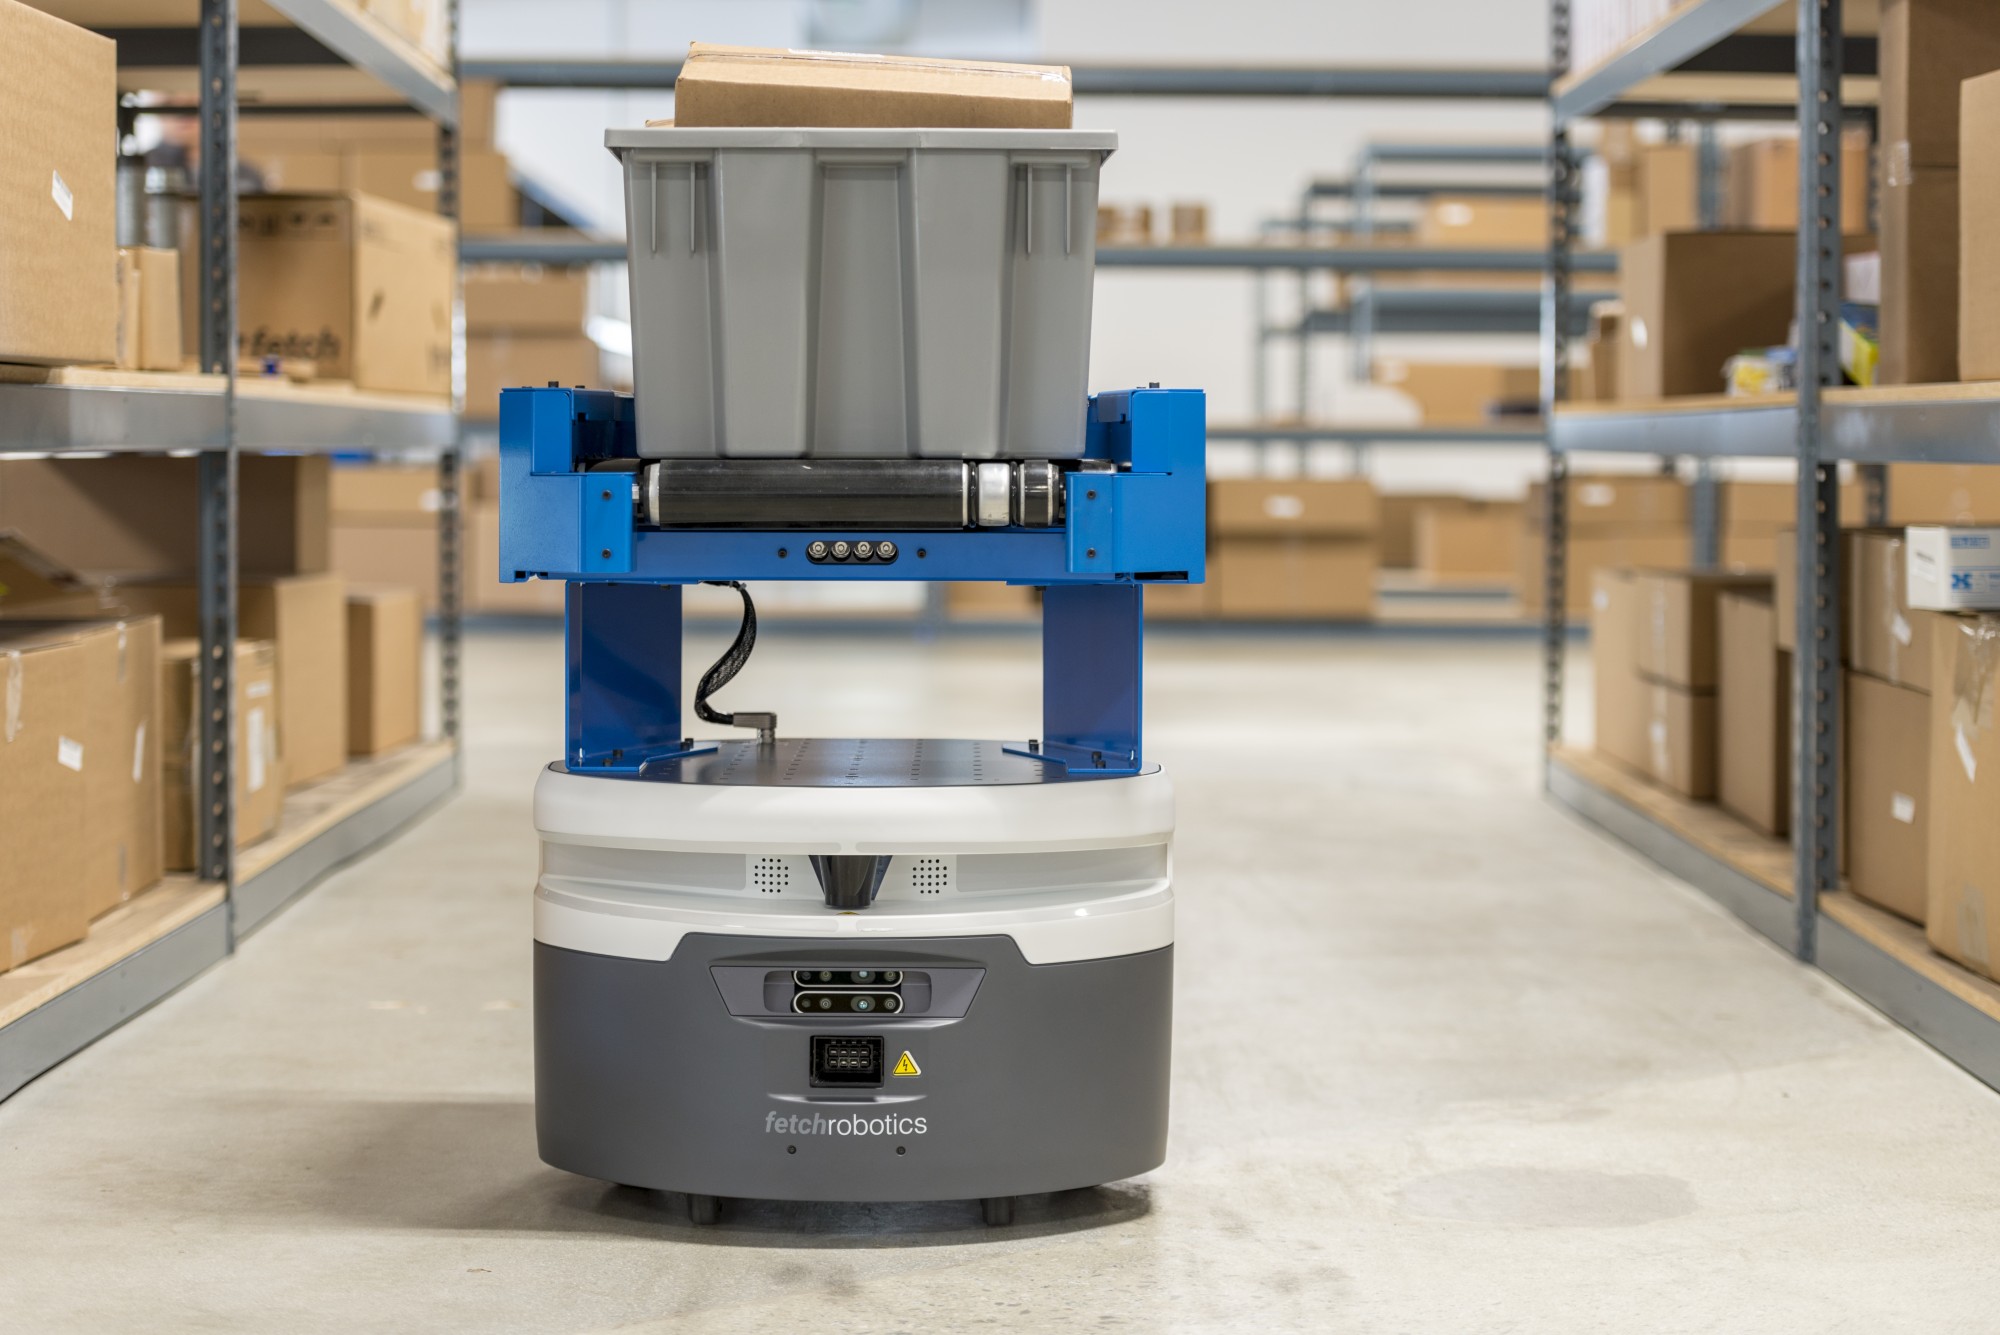 Fetch Robotics partners with VARGO on integrated fulfillment solution - Image